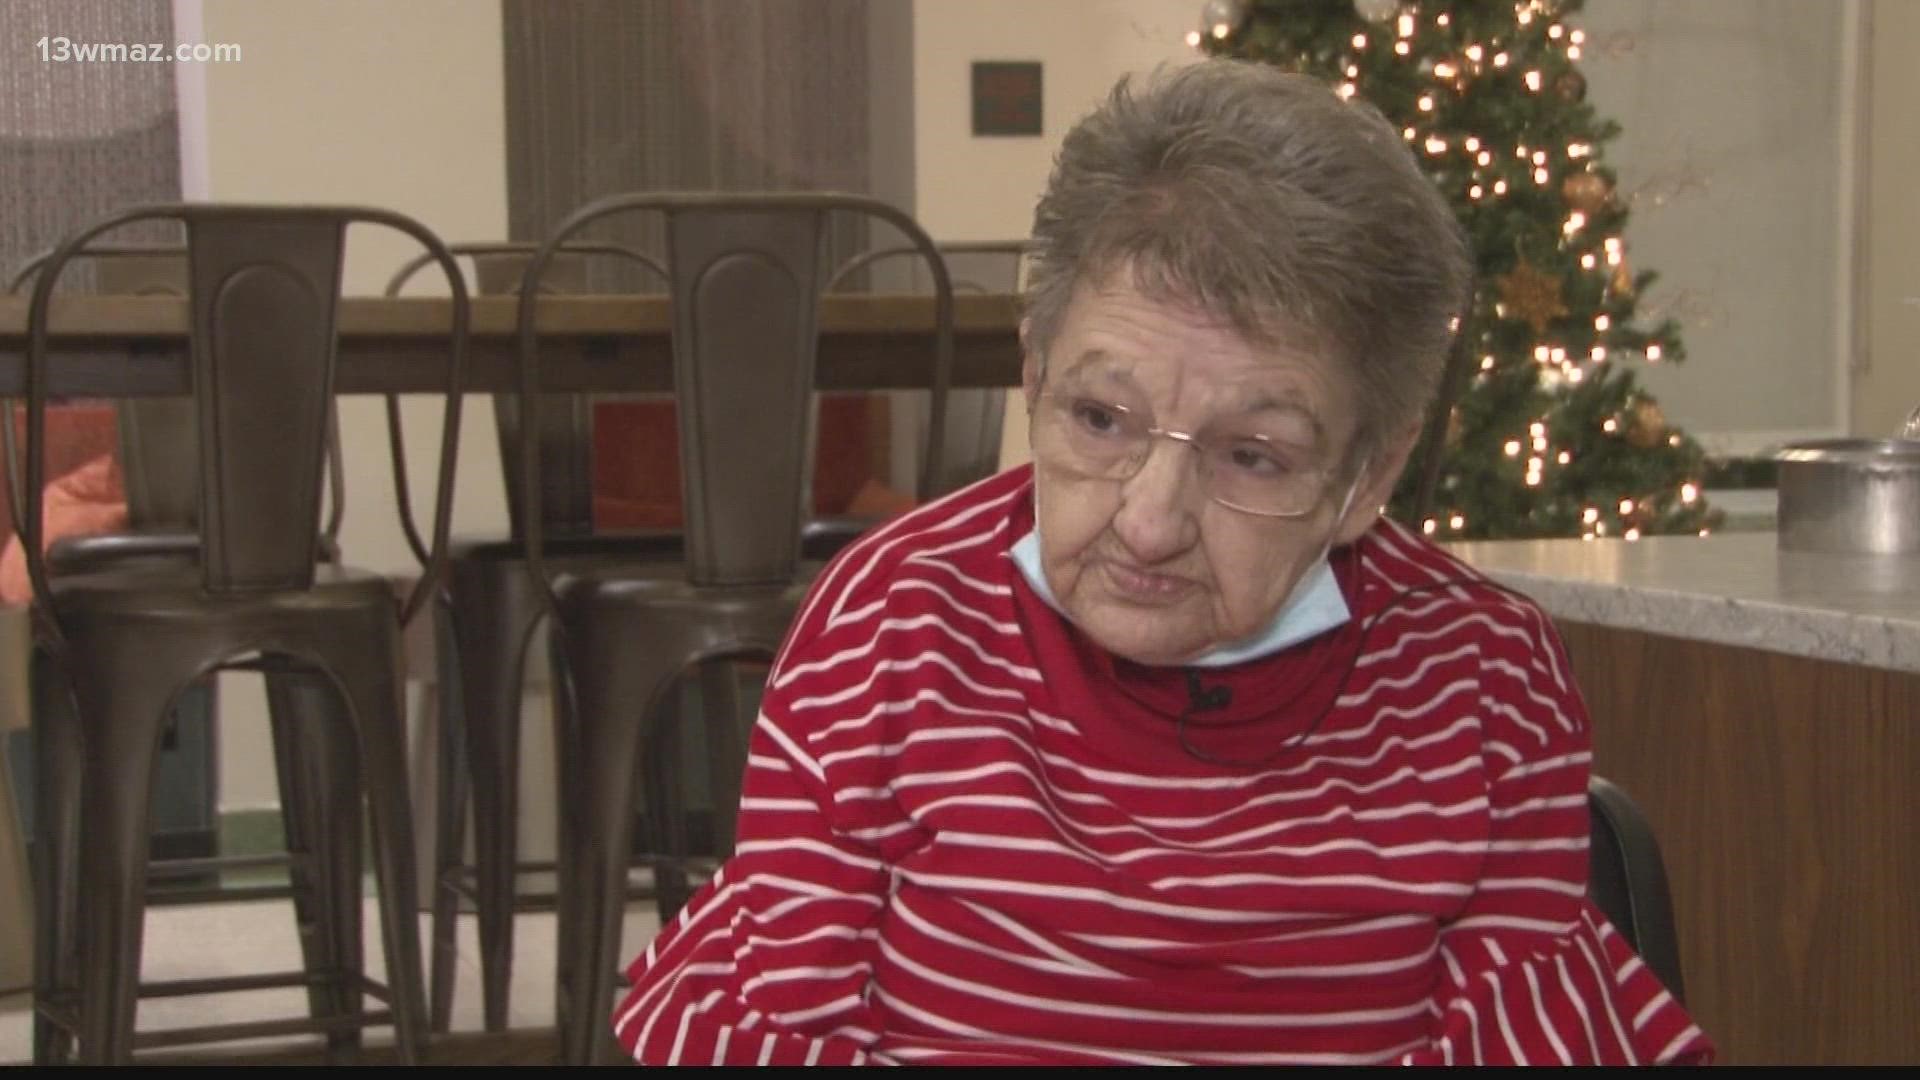 Sheila Fowler says she spoke to her son every day. She knew something was wrong when he didn't call Christmas morning.